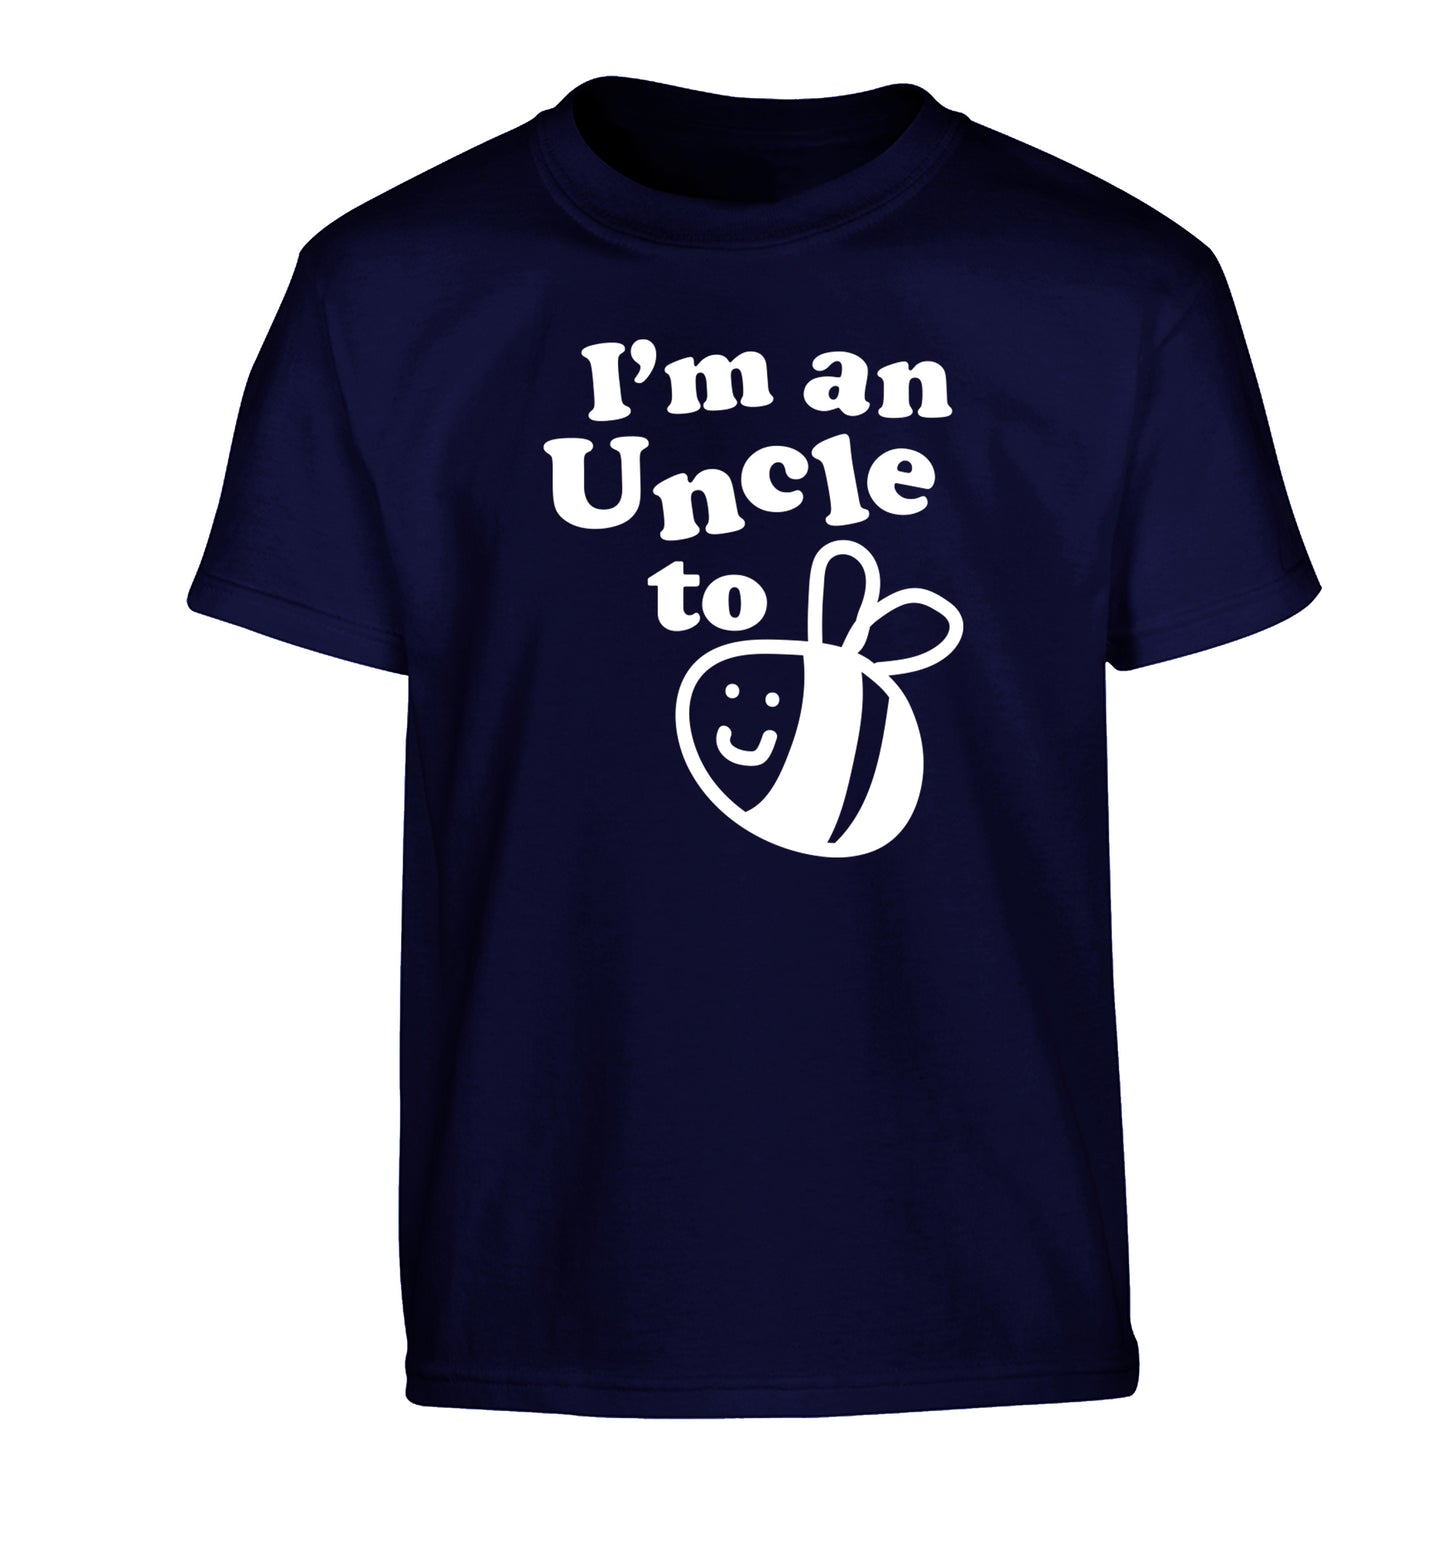 I'm an uncle to be Children's navy Tshirt 12-14 Years